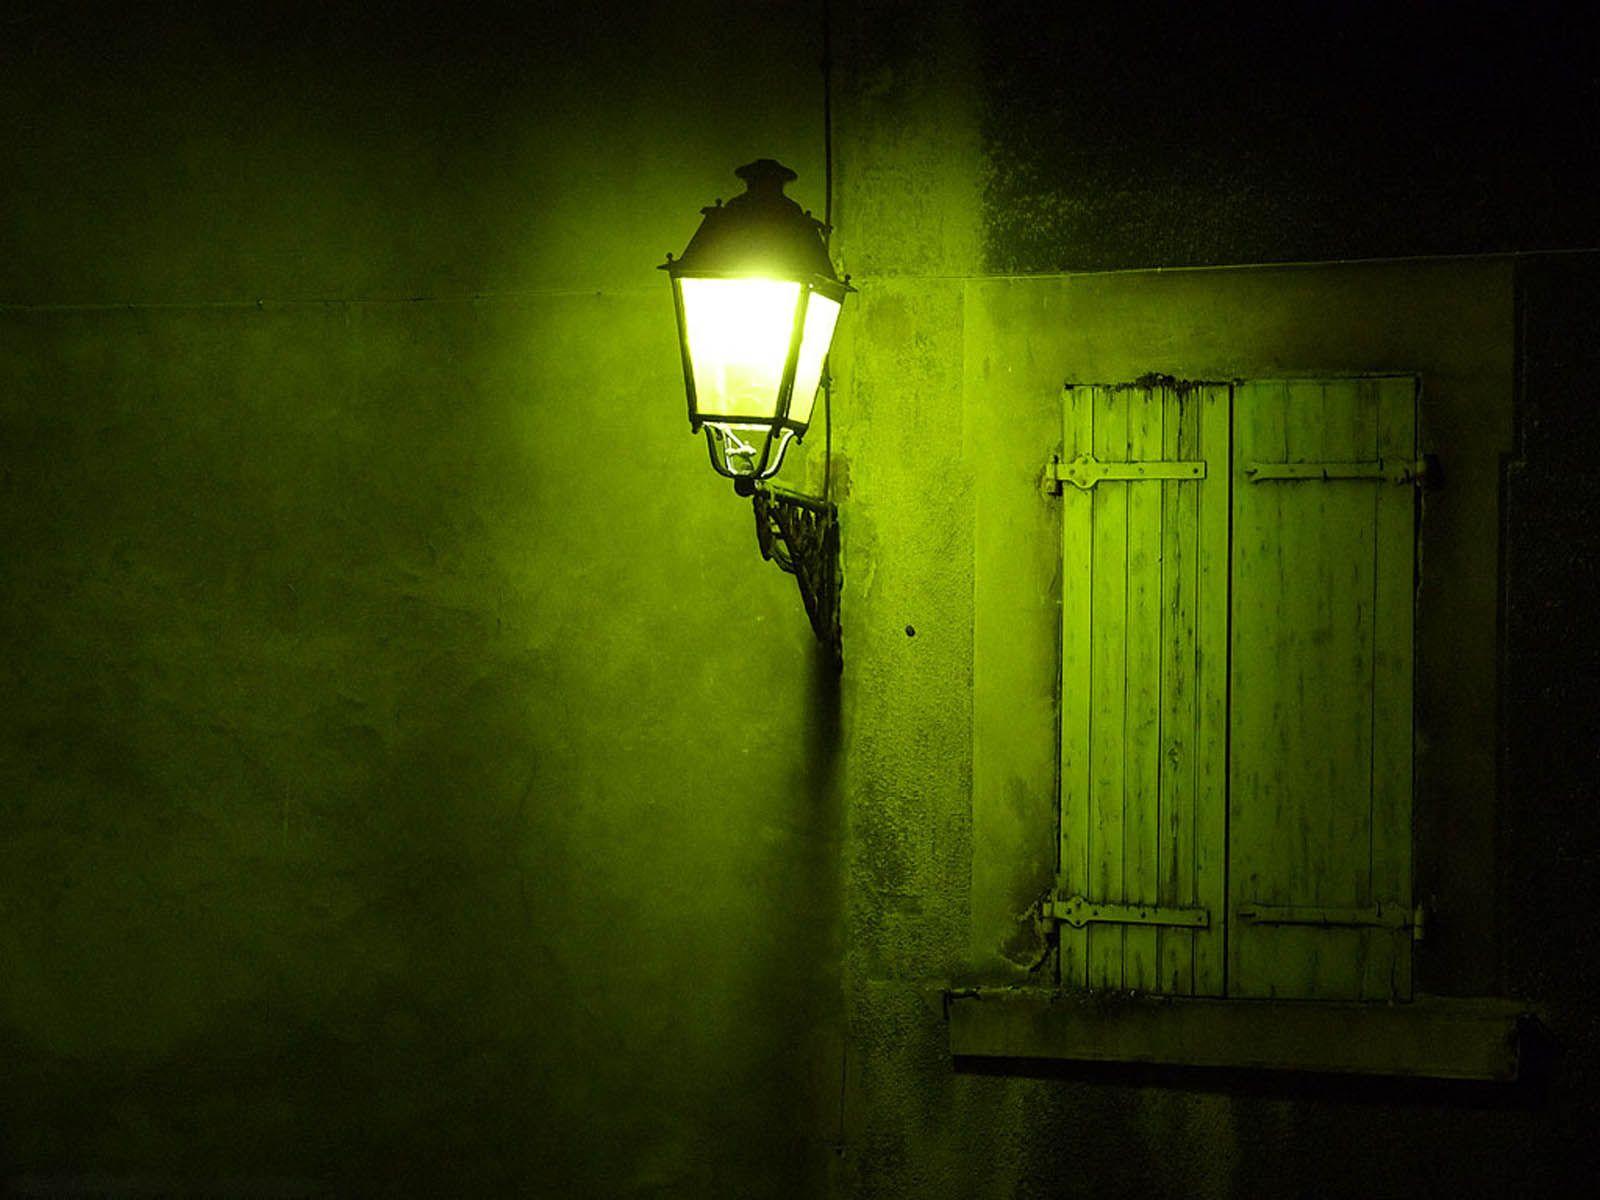 Street Lamp. Let there b light!. Street lamp and Wallpaper